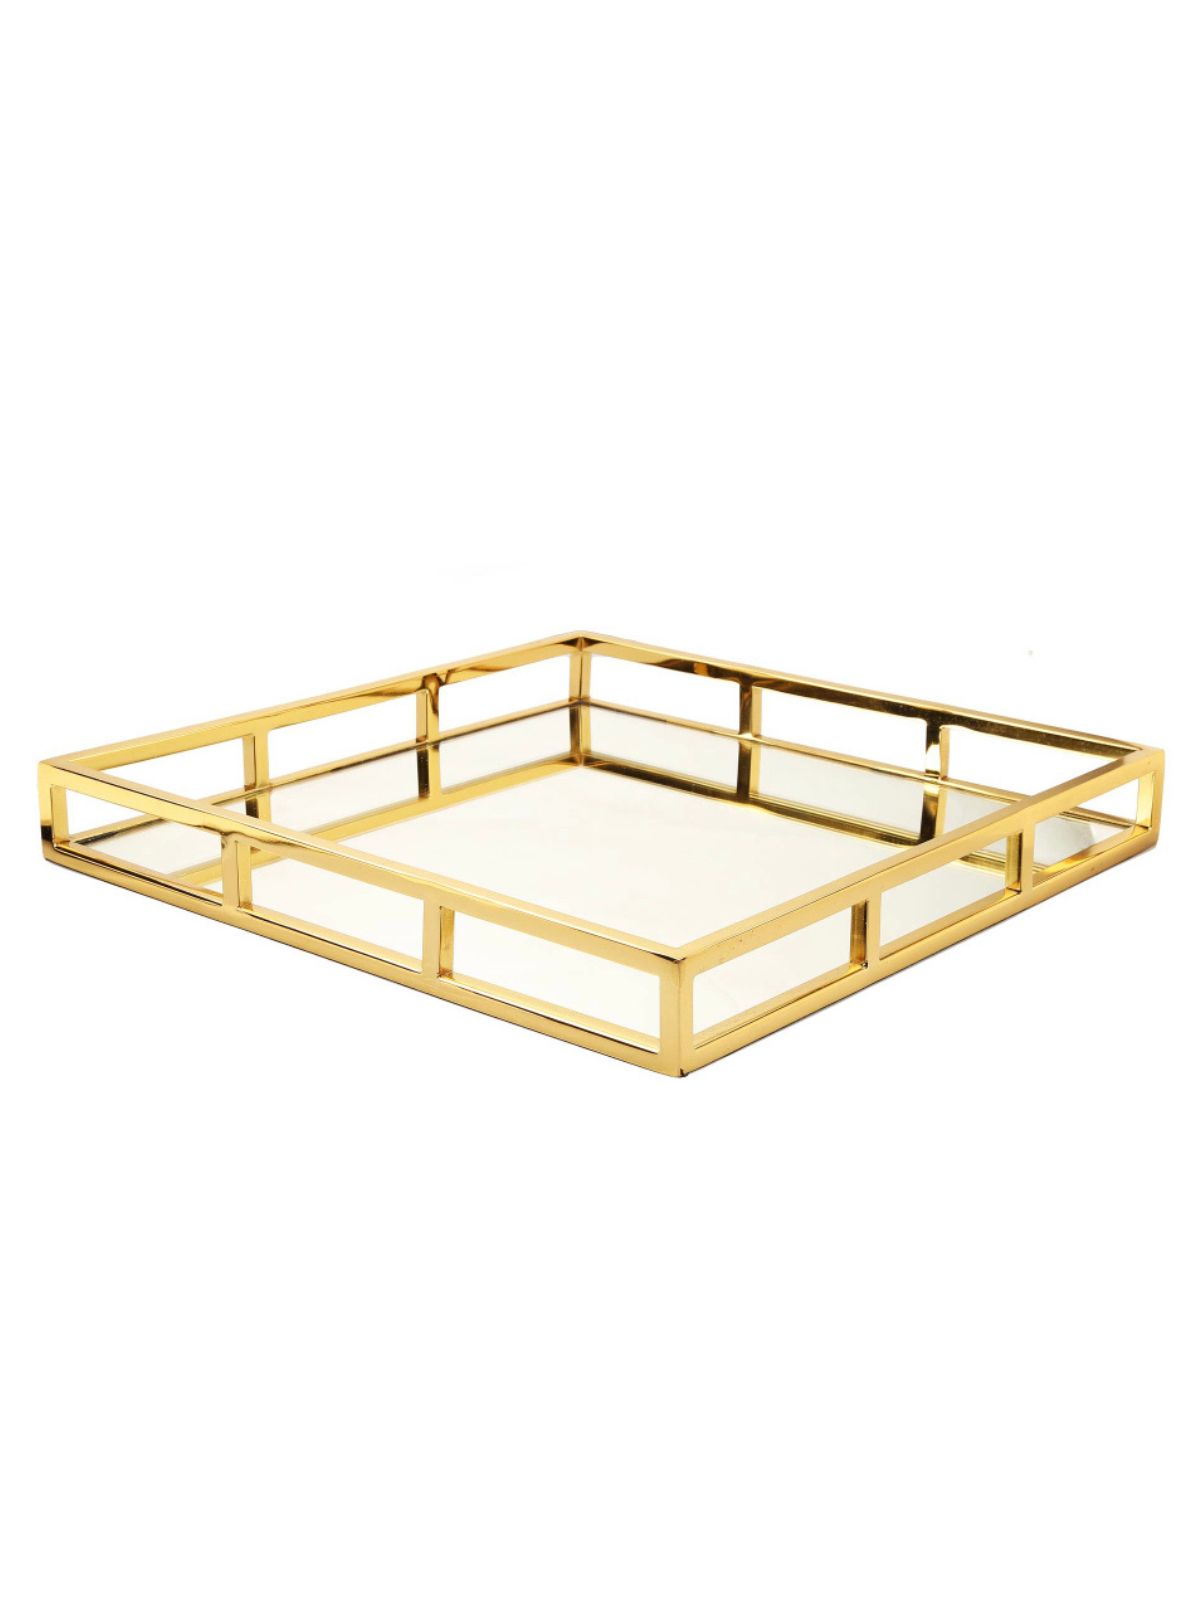 Large Gold Squared Decorative Stainless Steel Tray with Mirror Base.